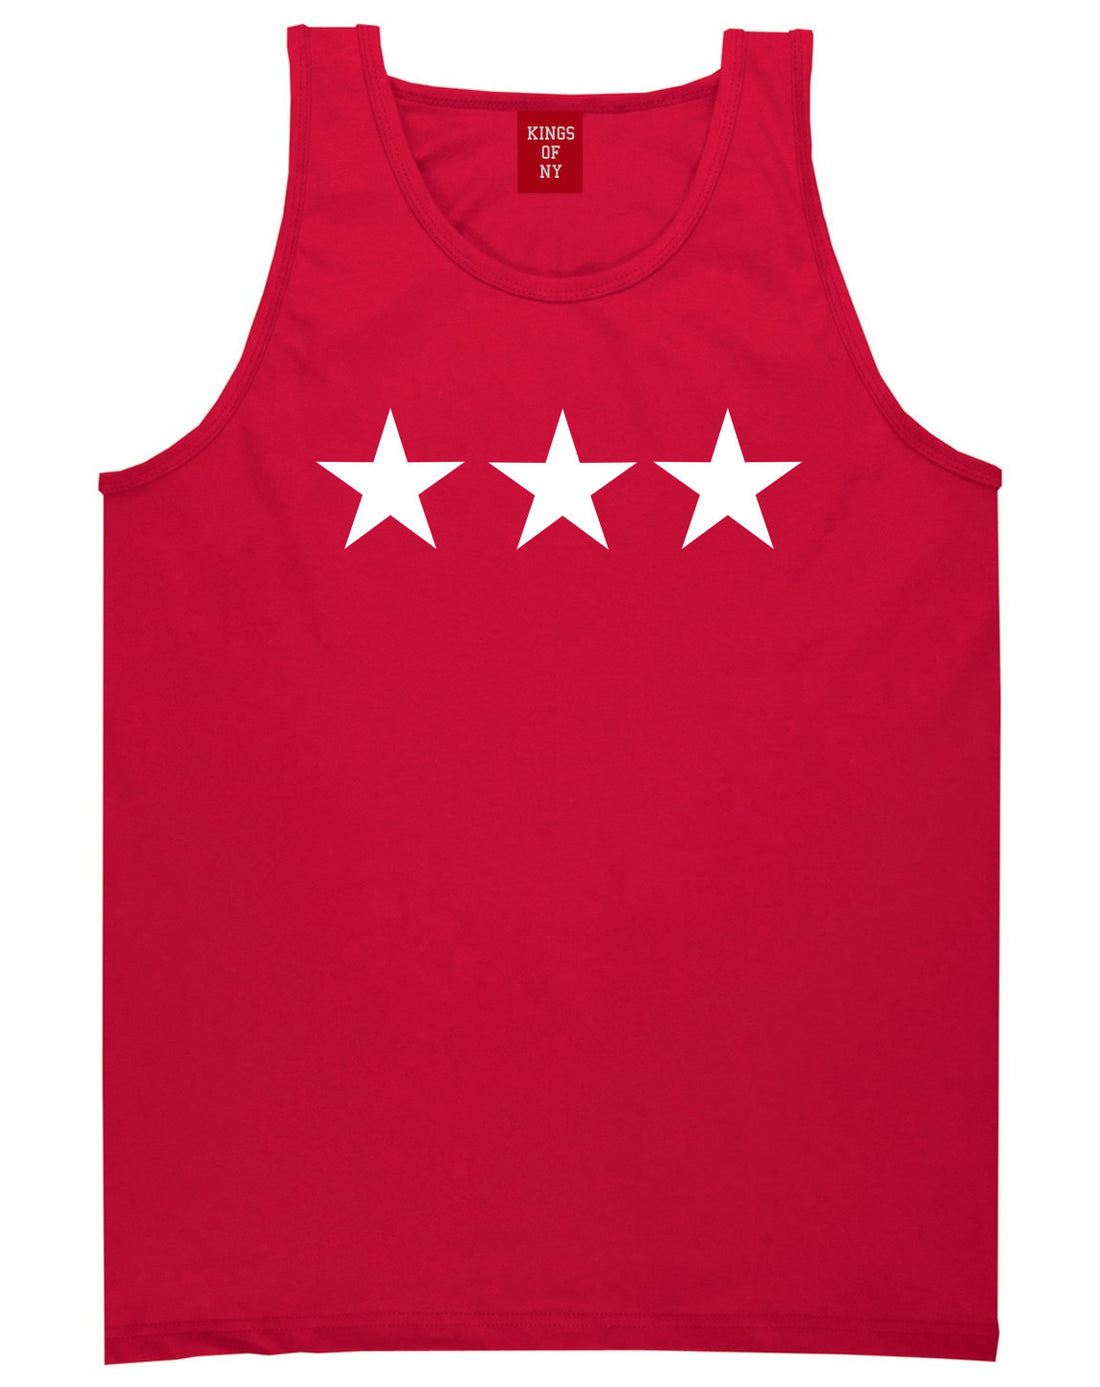 Kings Of NY Three Stars Tank Top in Red